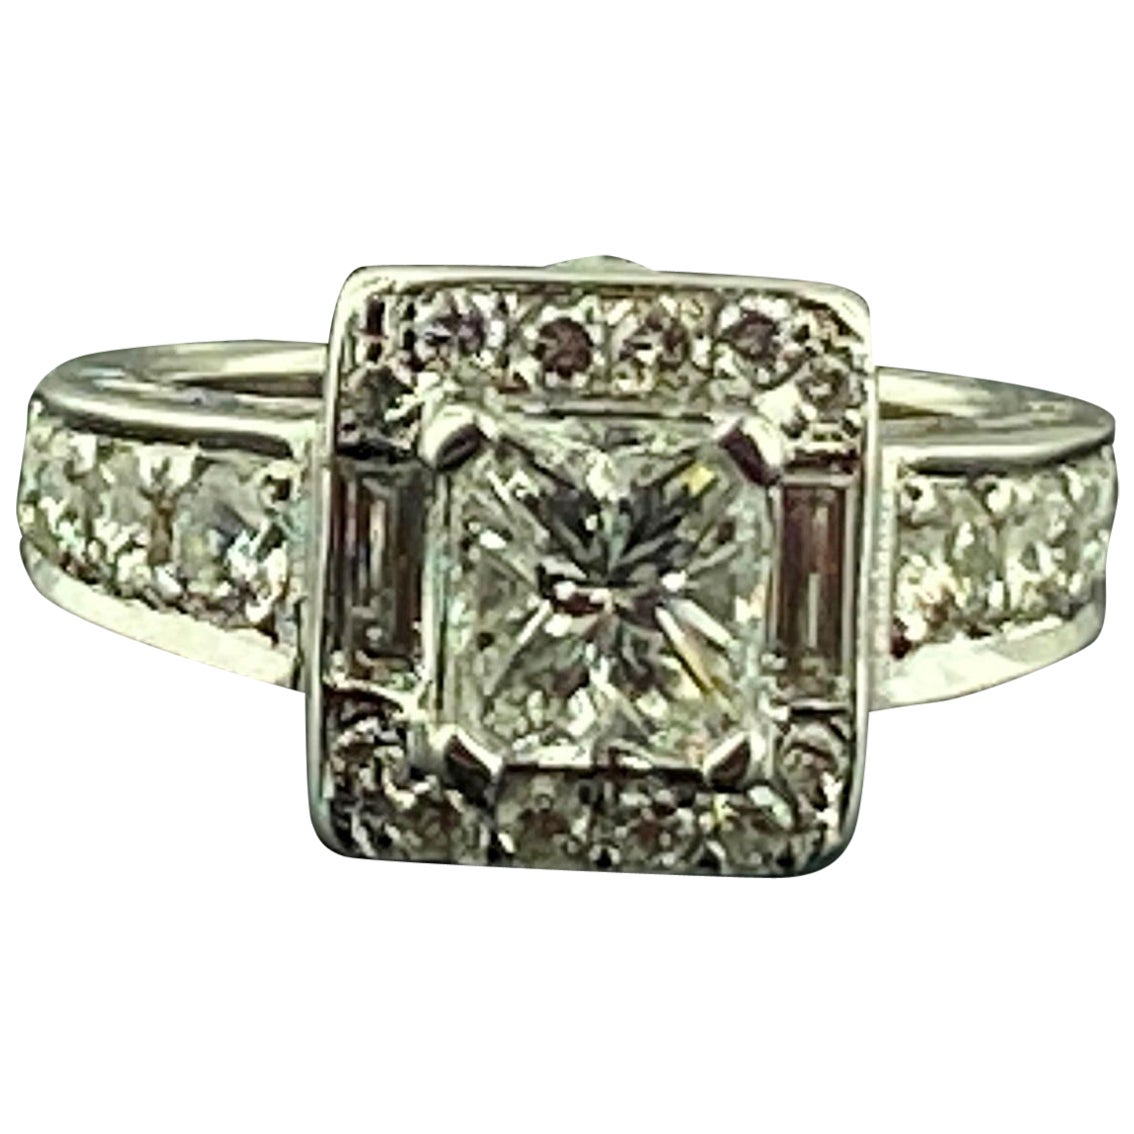 14KT White Gold Ring with 1.75 ct Princess Cut  and 24 Diamonds